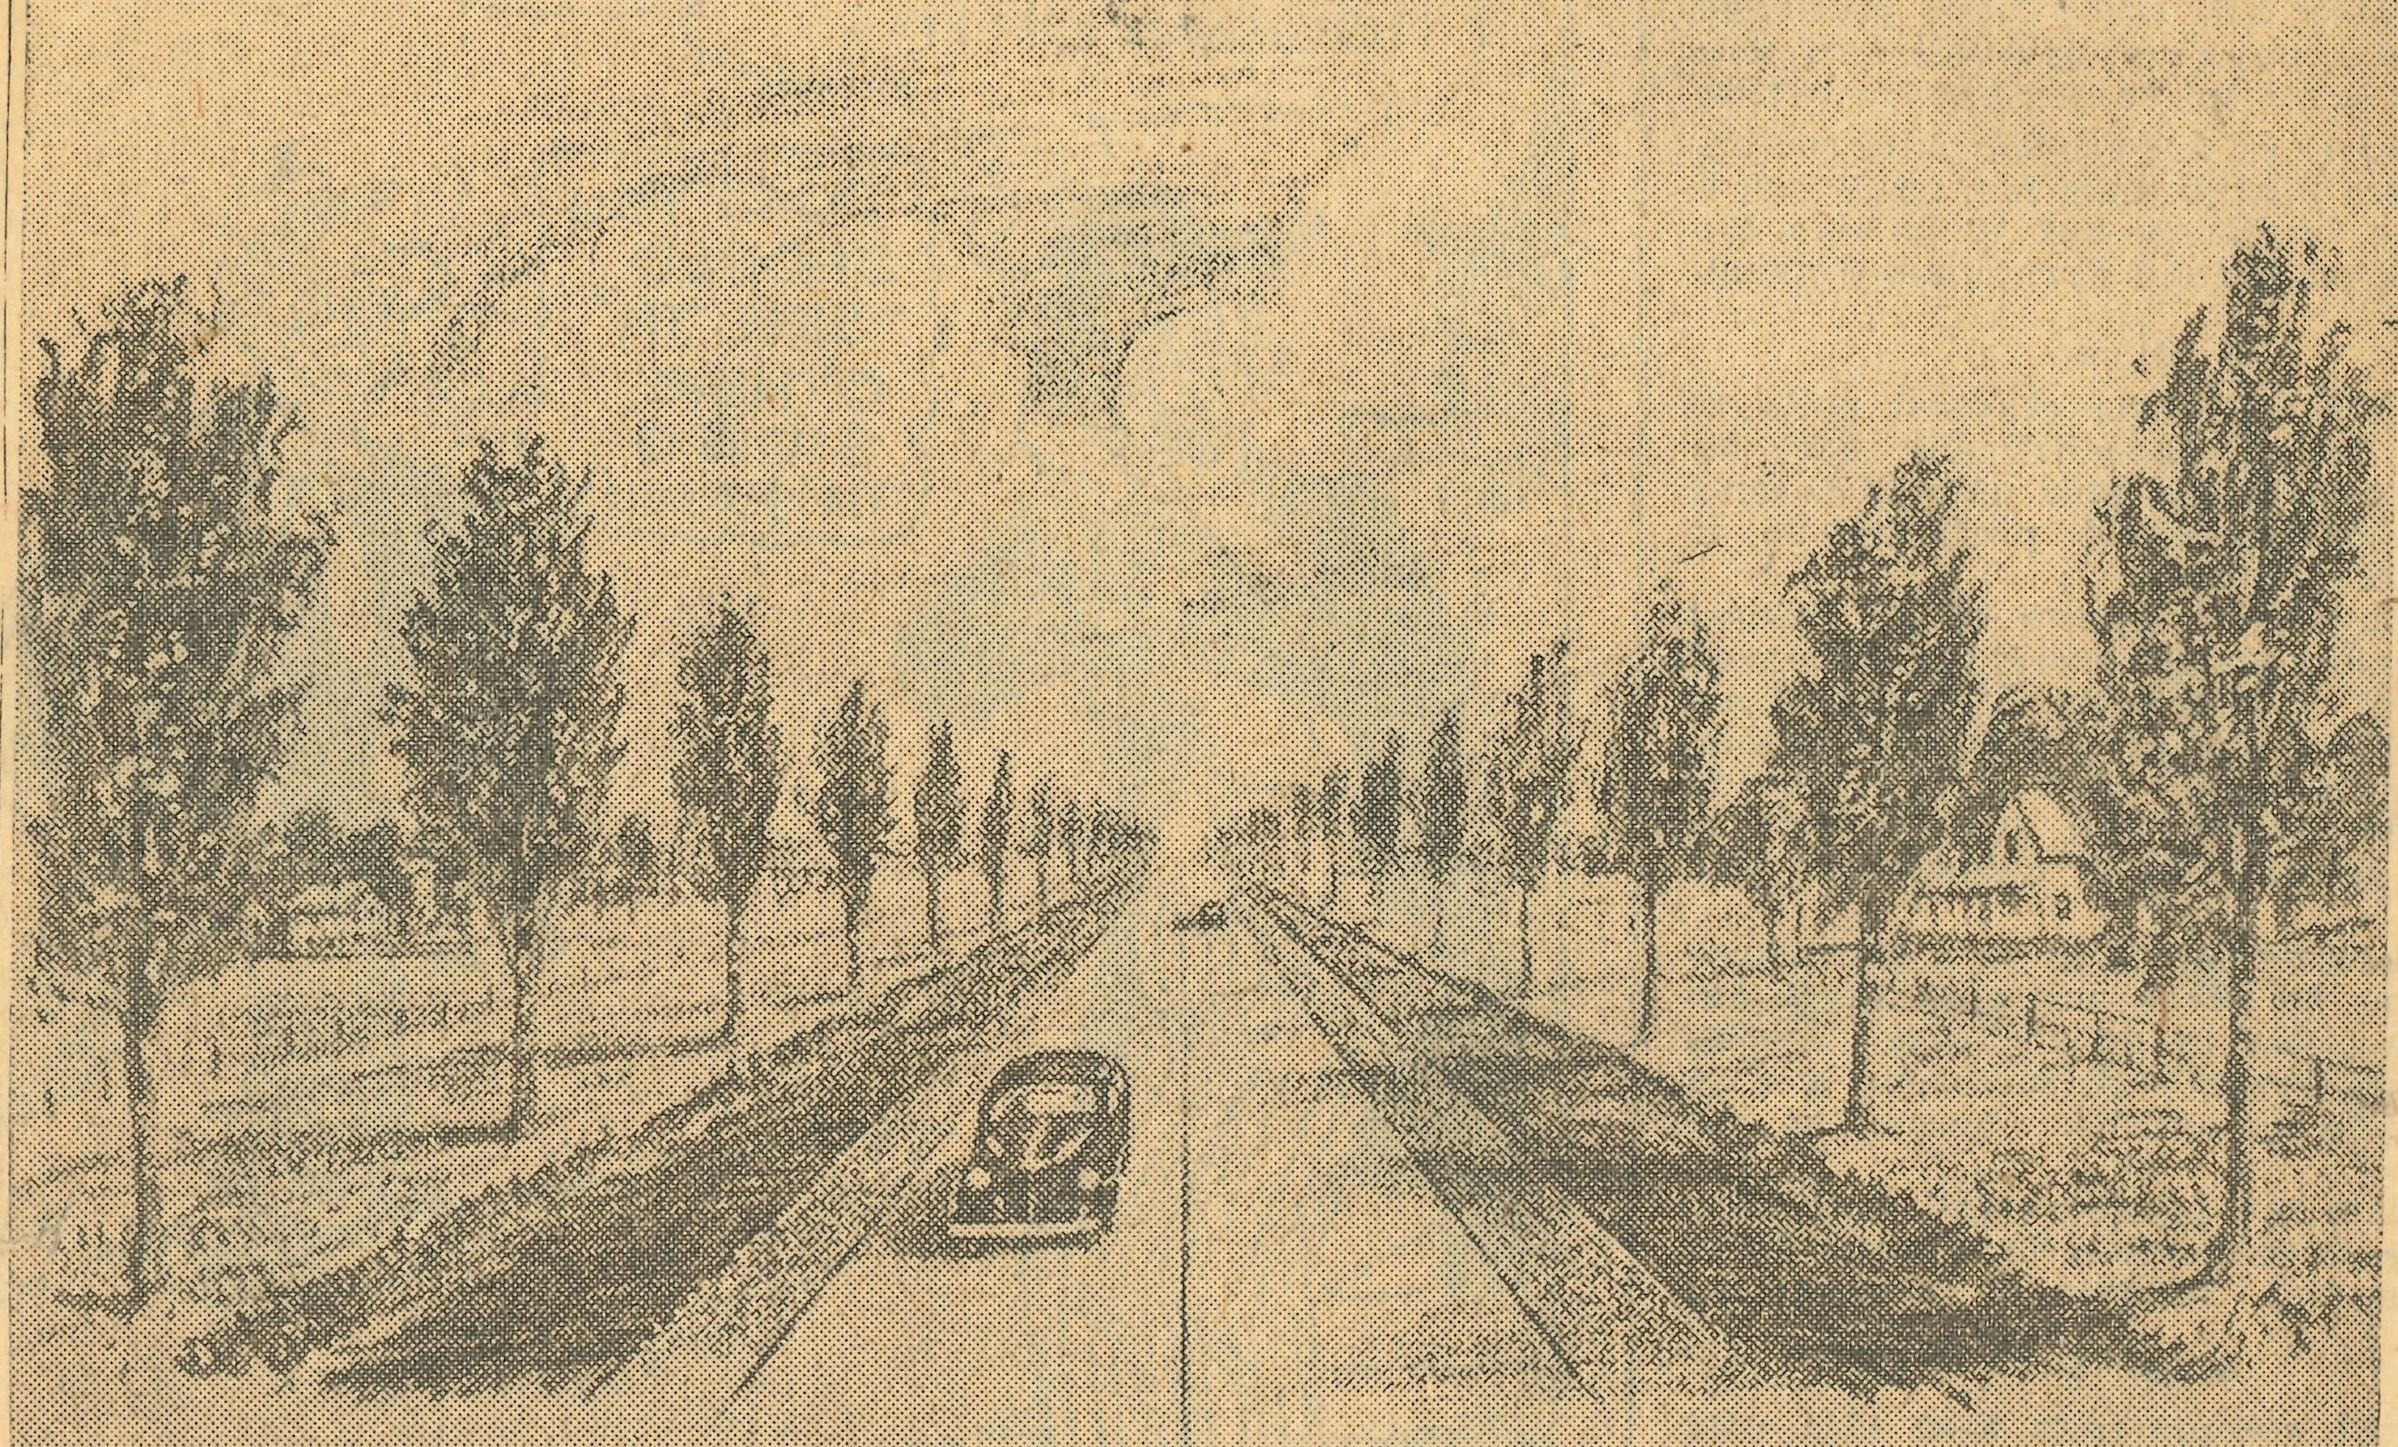 A. Andsersons Sketch of Harriet Barney's idea for Victory Drive